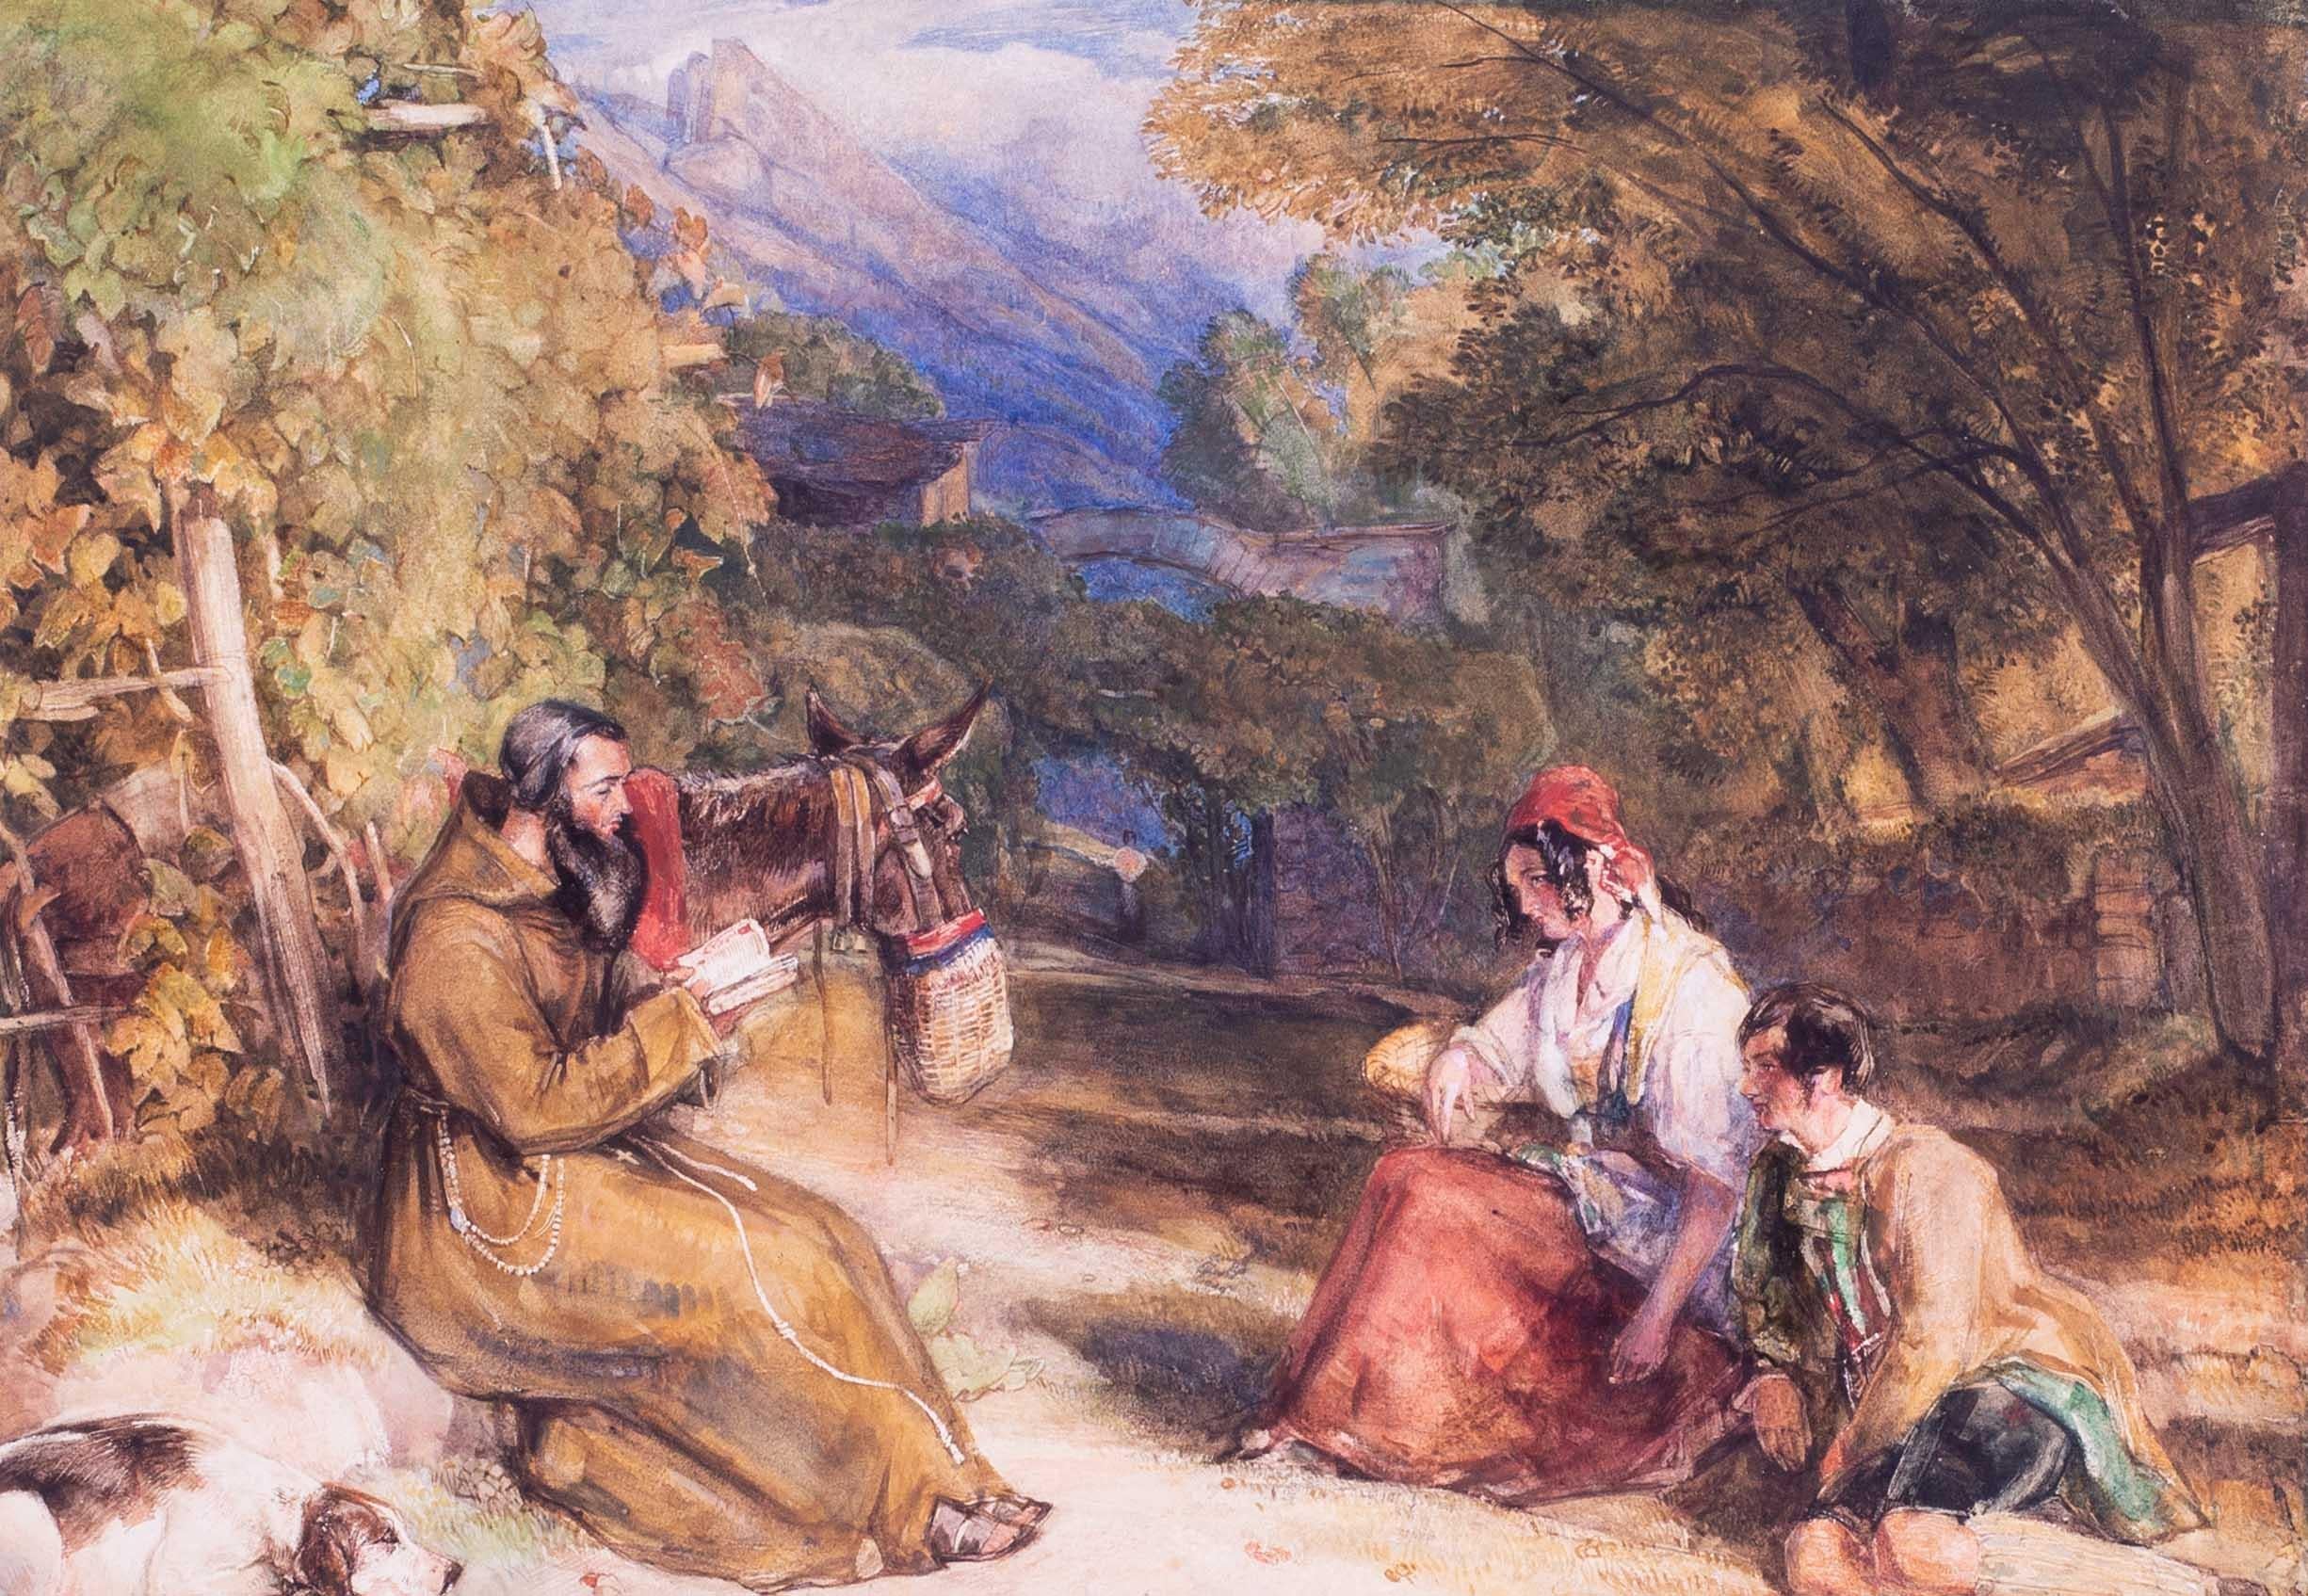 John Frederick Lewis (British, 1805 – 1876)
Receiving a blessing on a mountain track
Watercolour on paper
12.1/2 x 17.1/2 in. (31.8 x 44.5 cm.)

Provenance: Bonhams London, 22nd Jan 2014, Lot 70
